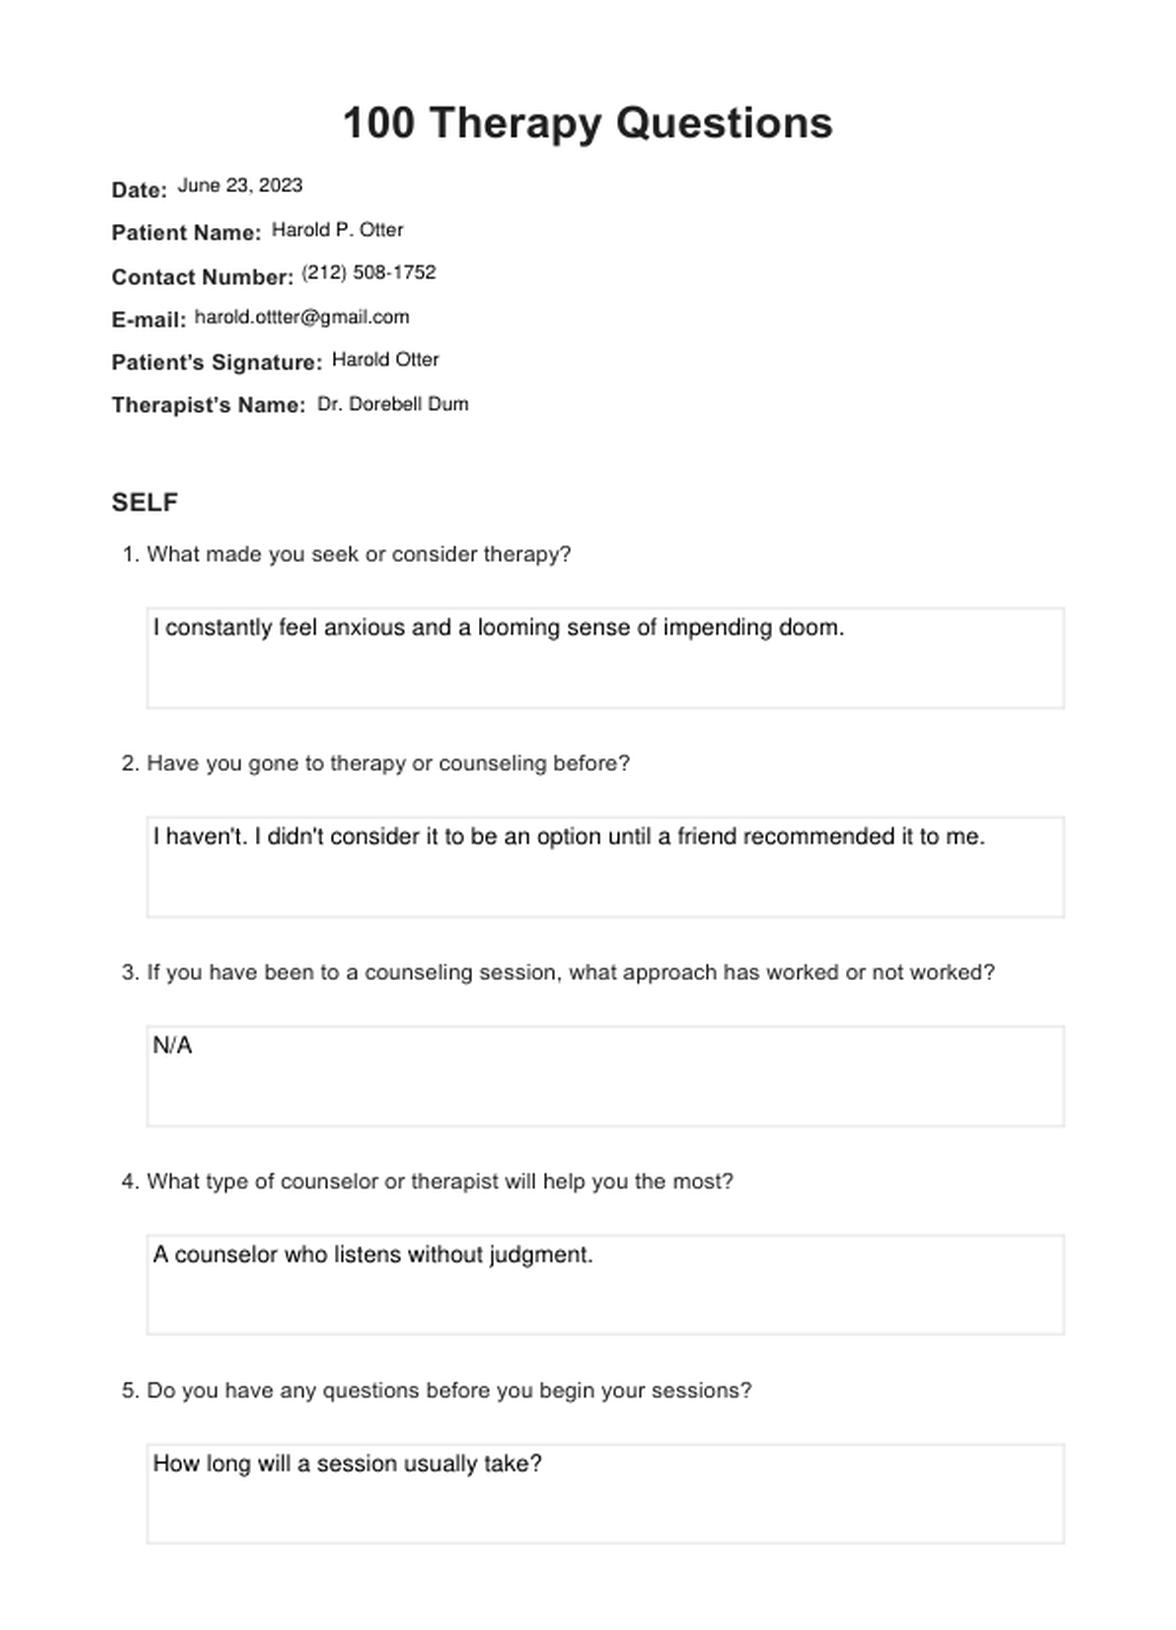 100 Therapy Questions PDF Example